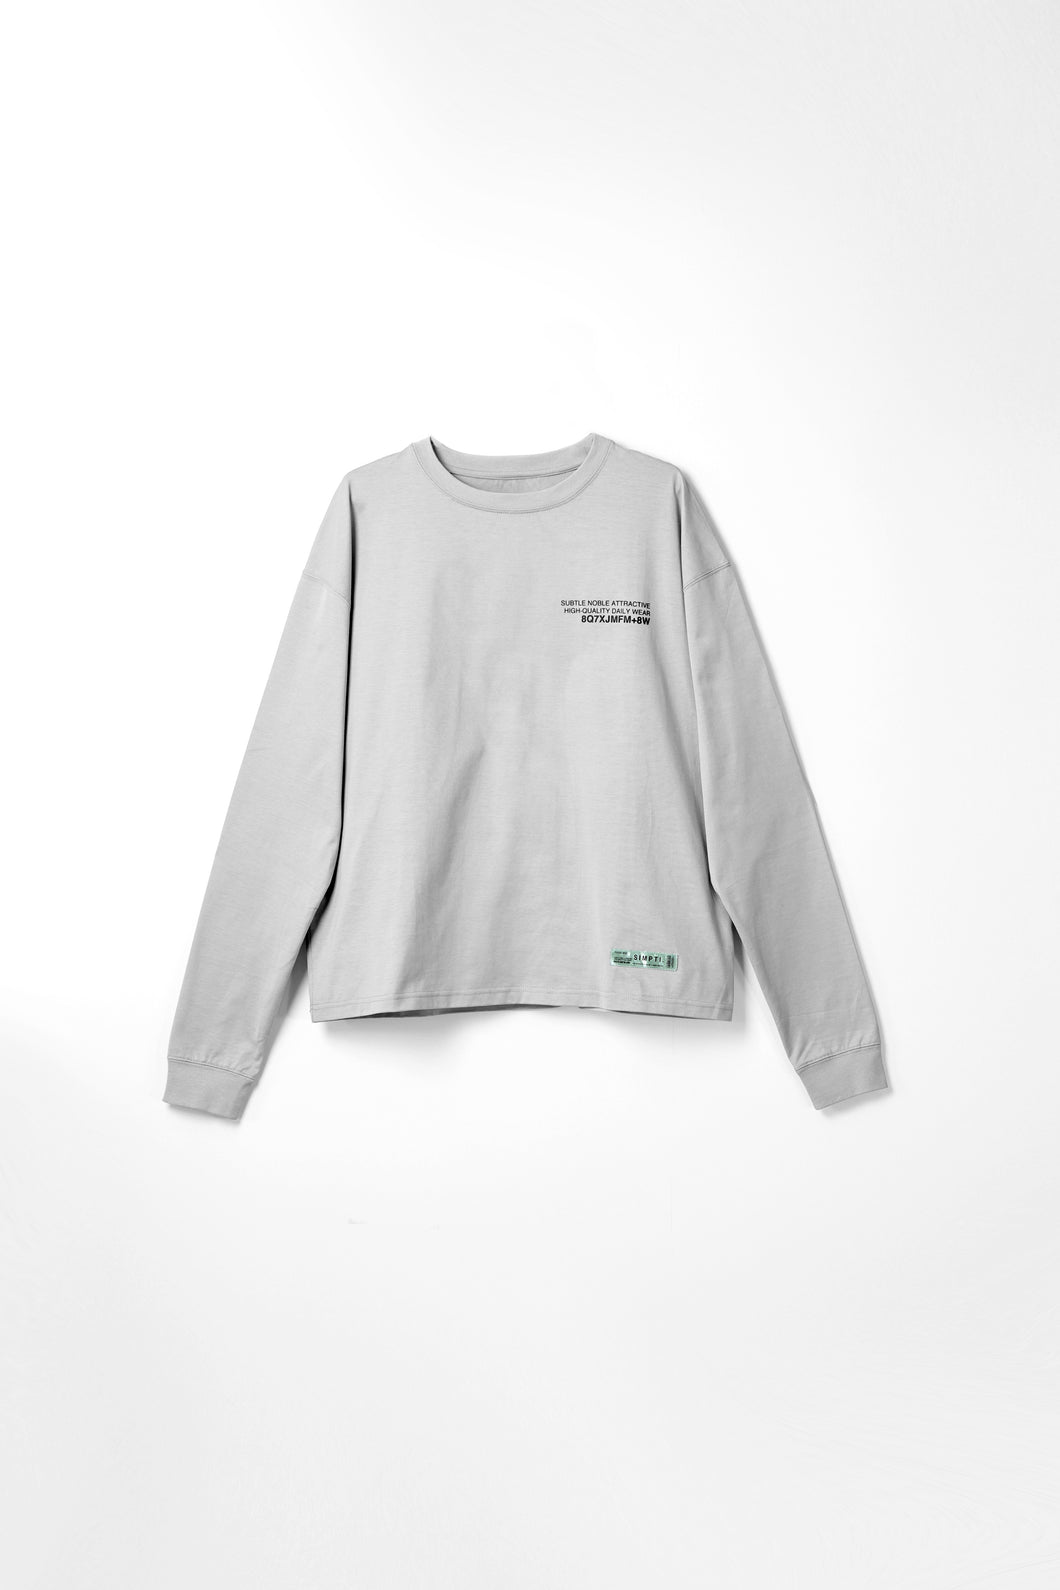 The ICON Long Sleeve.